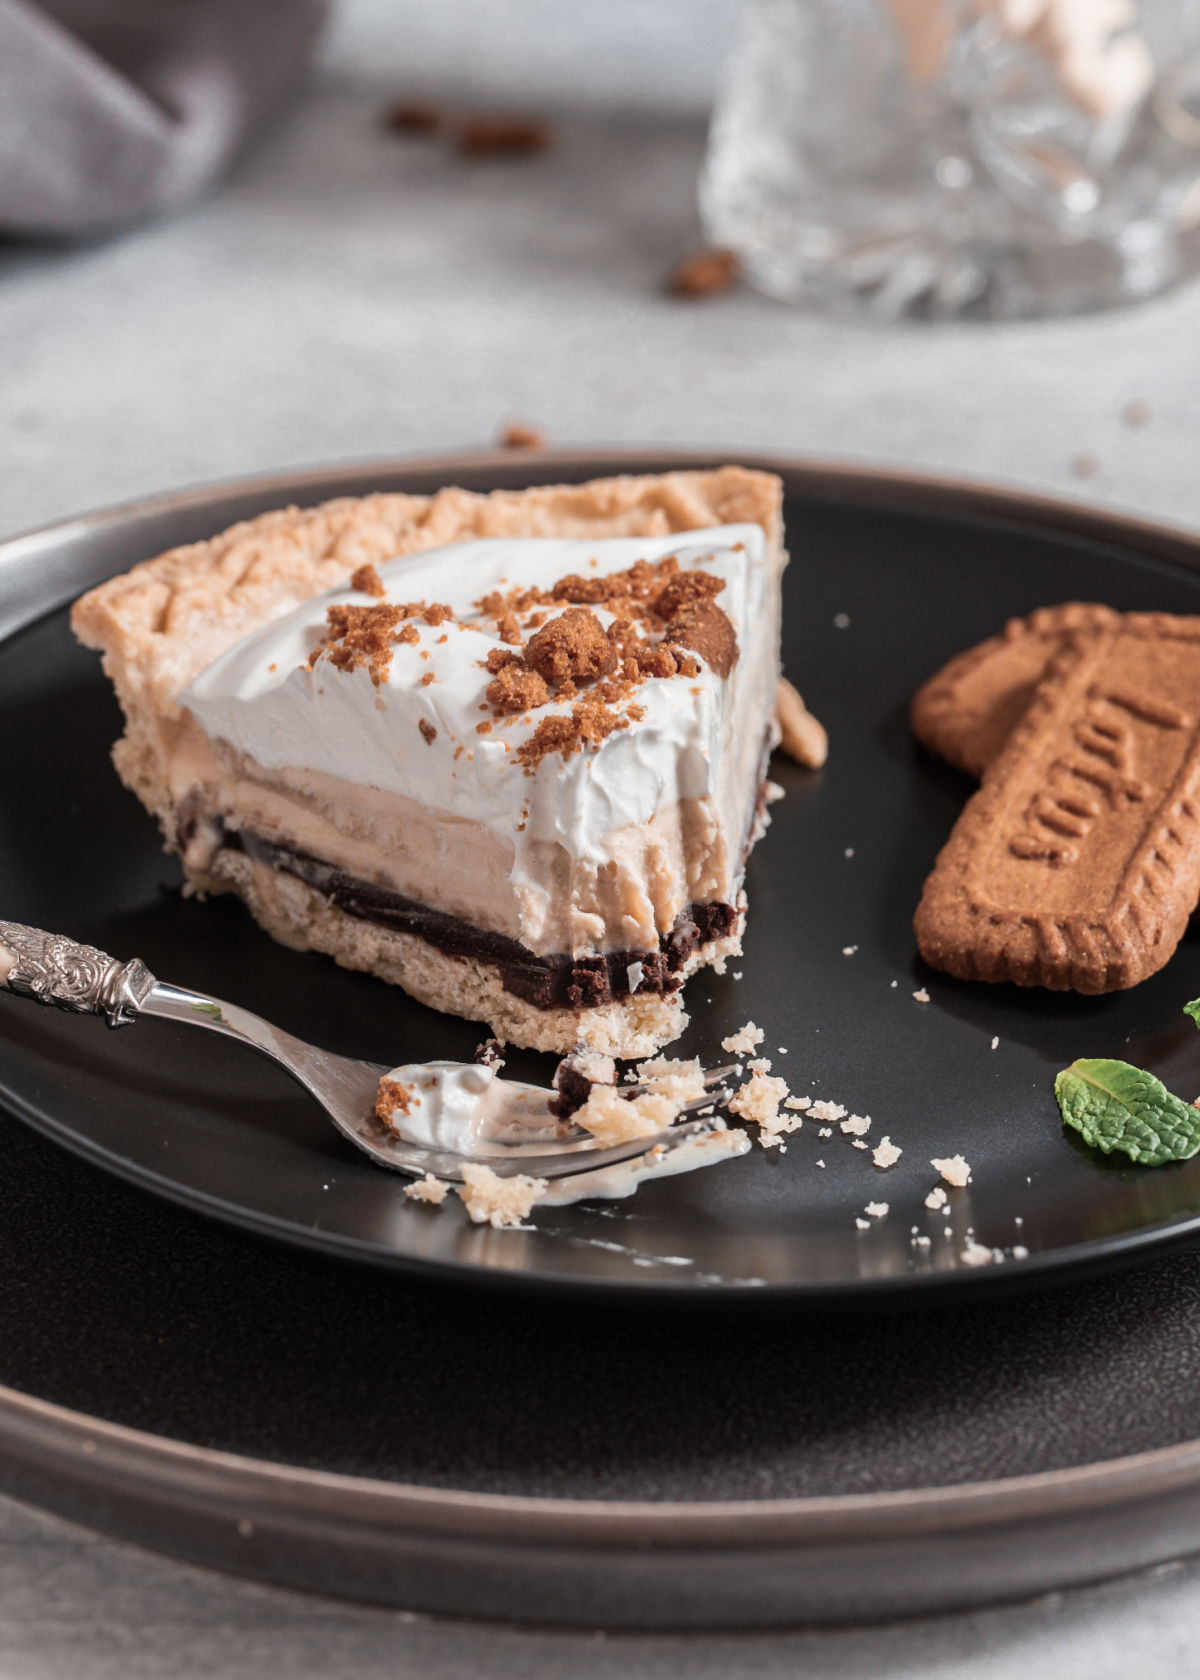 slice of ice cream pie with whipped cream on top and Biscoff cookies on the side, on black plate.